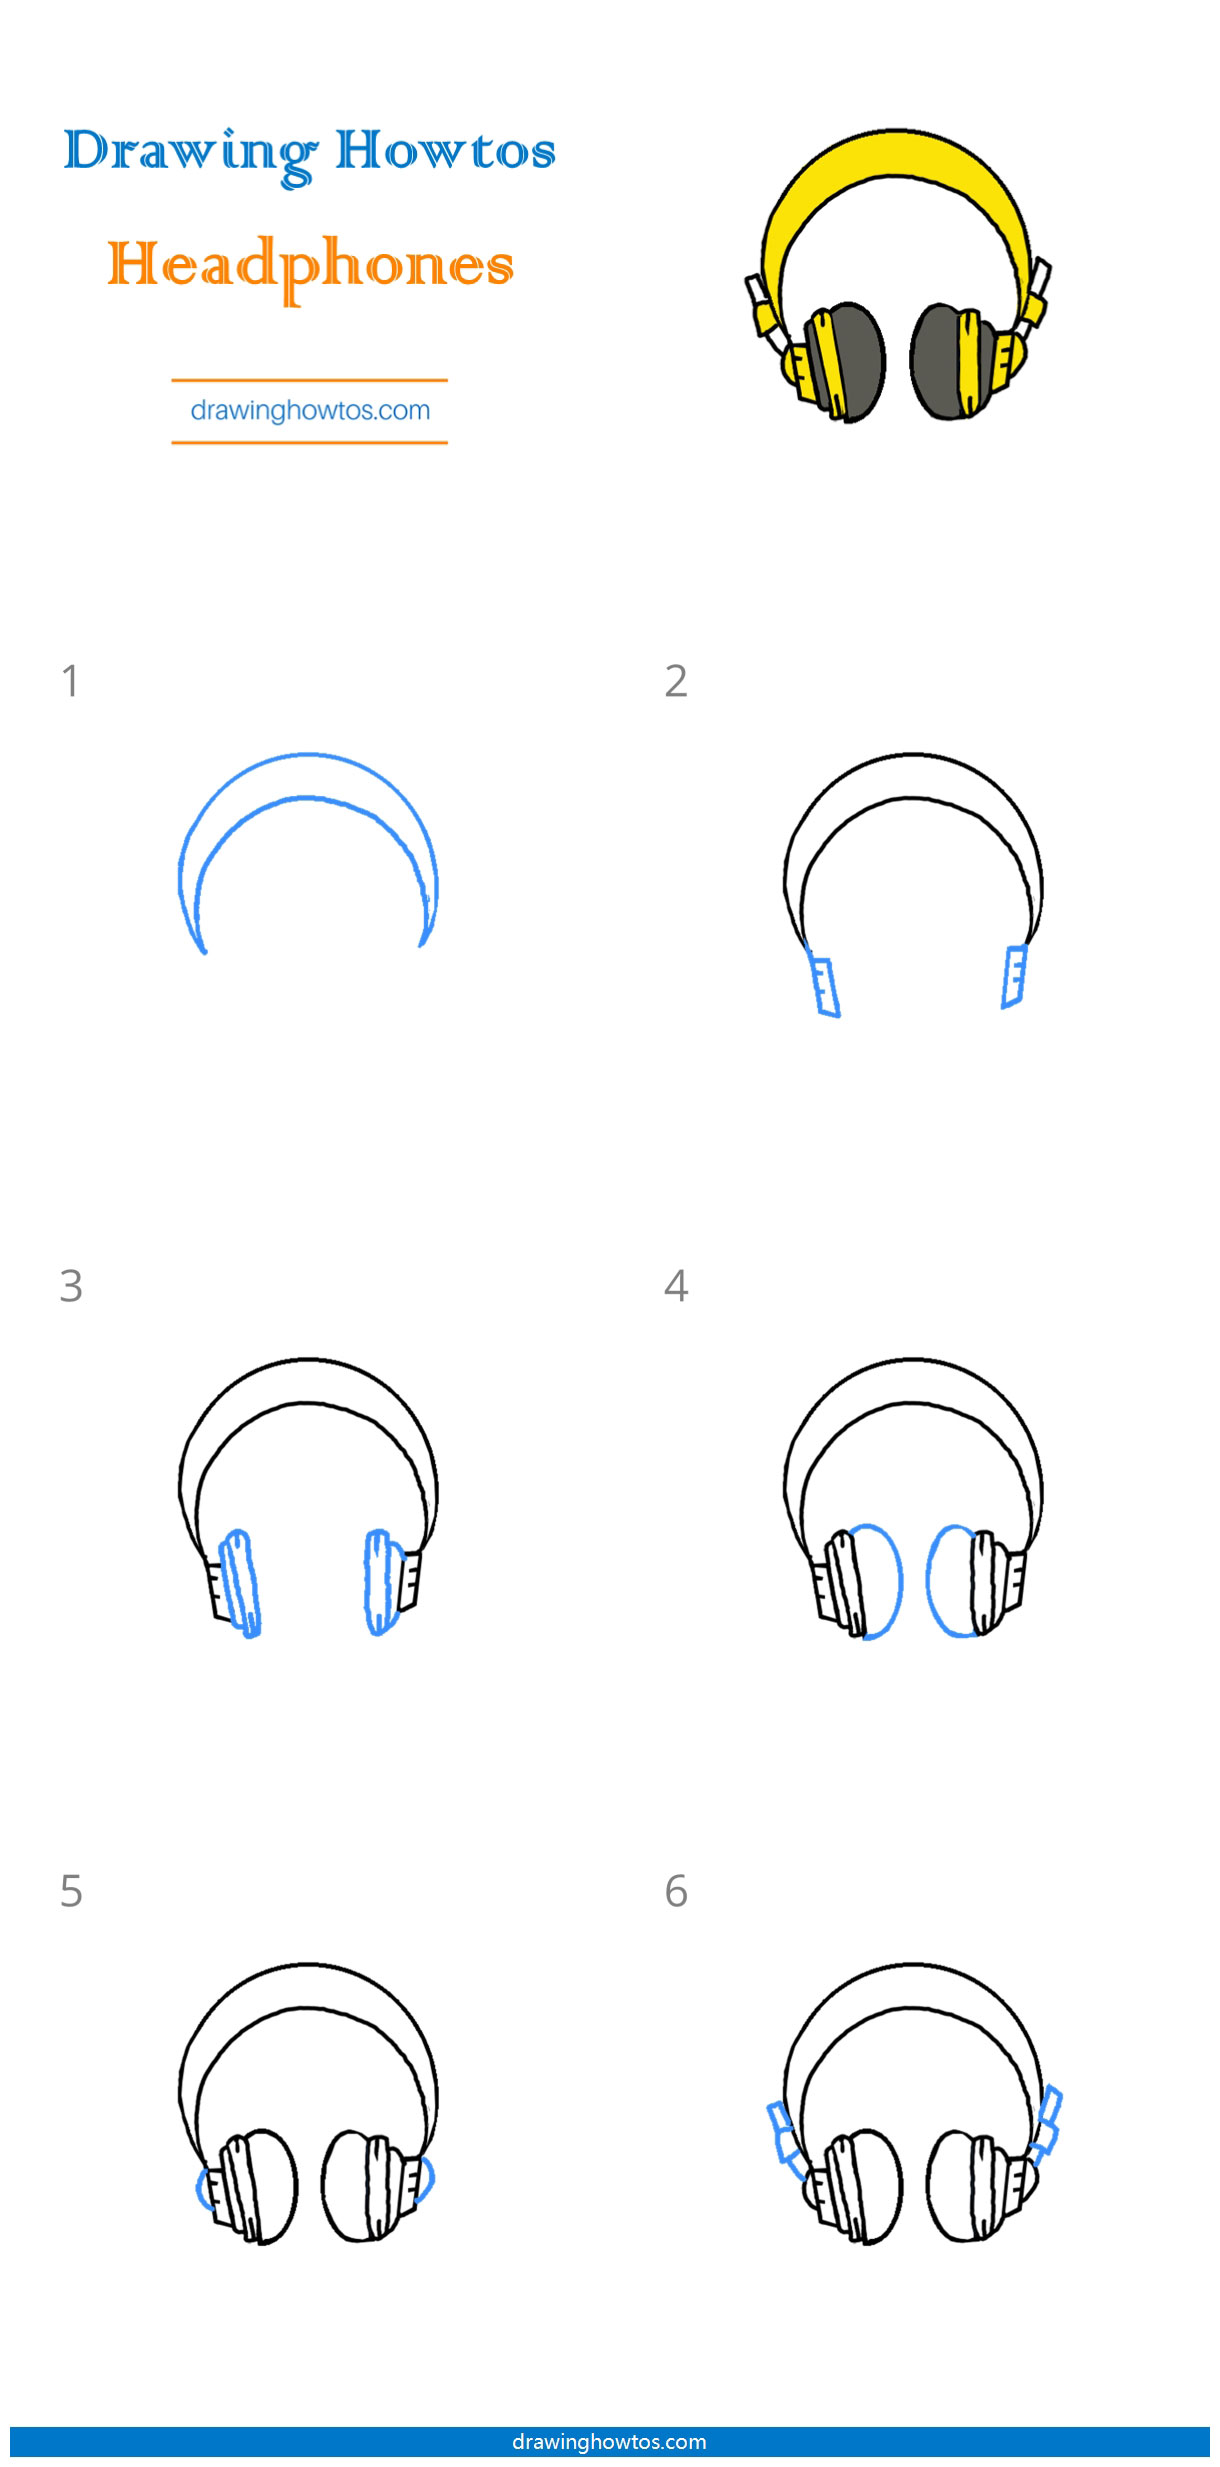 How to Draw Headphones Step by Step